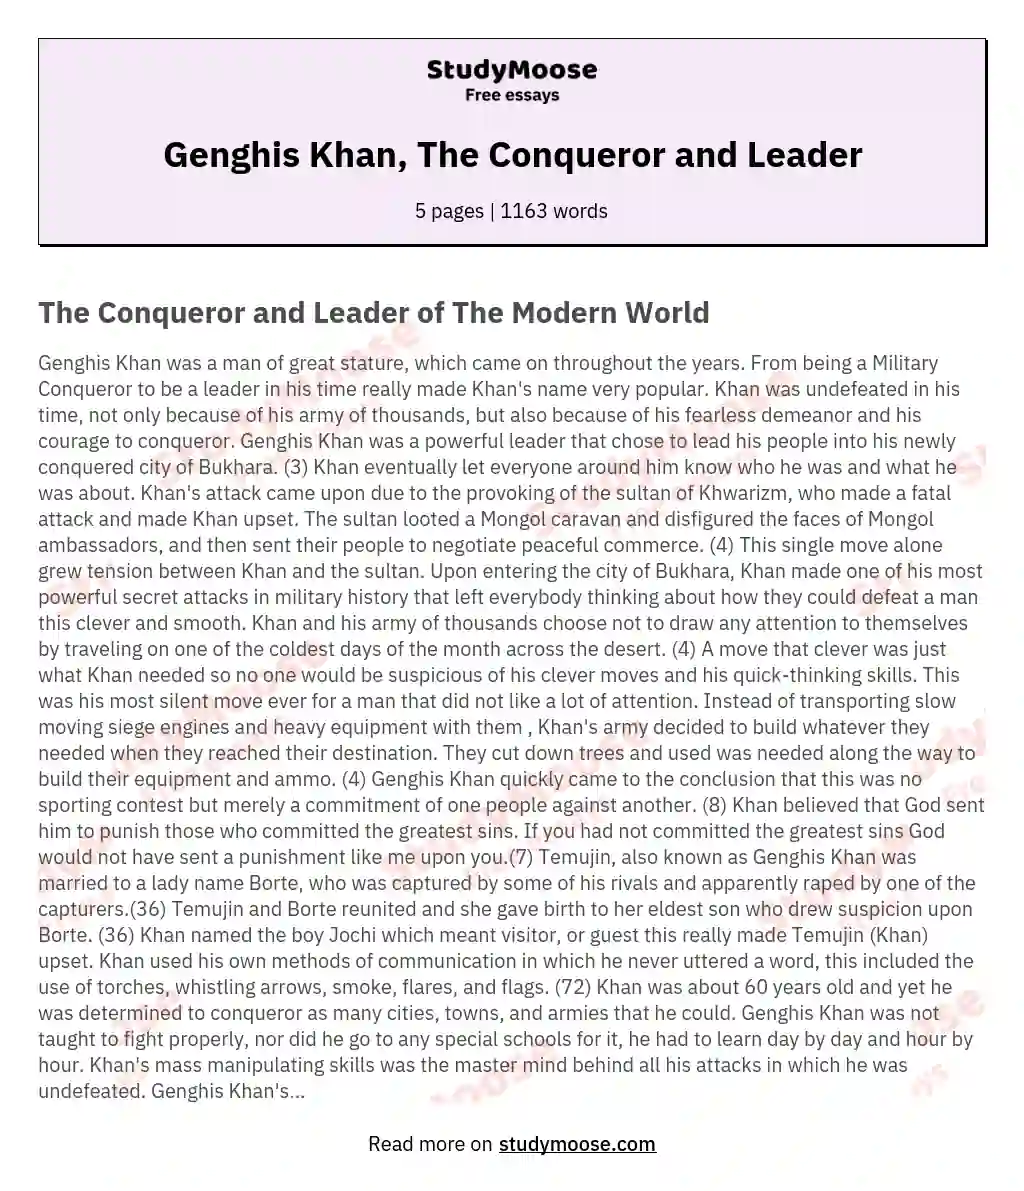 Genghis Khan, The Conqueror and Leader